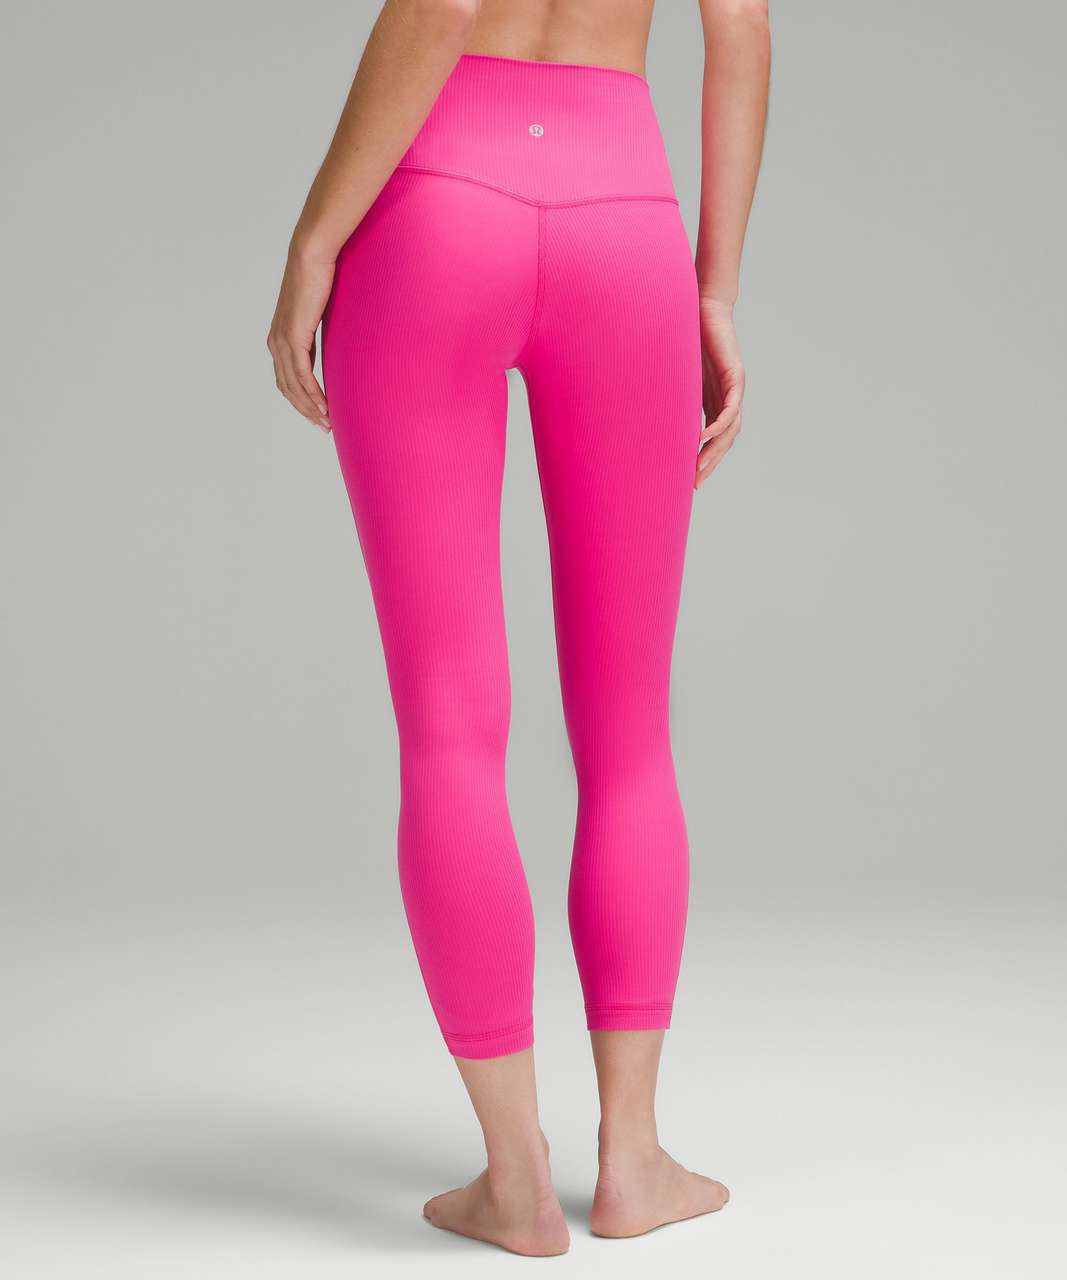 ❤️ NWT Lululemon Align HR Pant 25 Size 4 Guava Pink Bright Pink